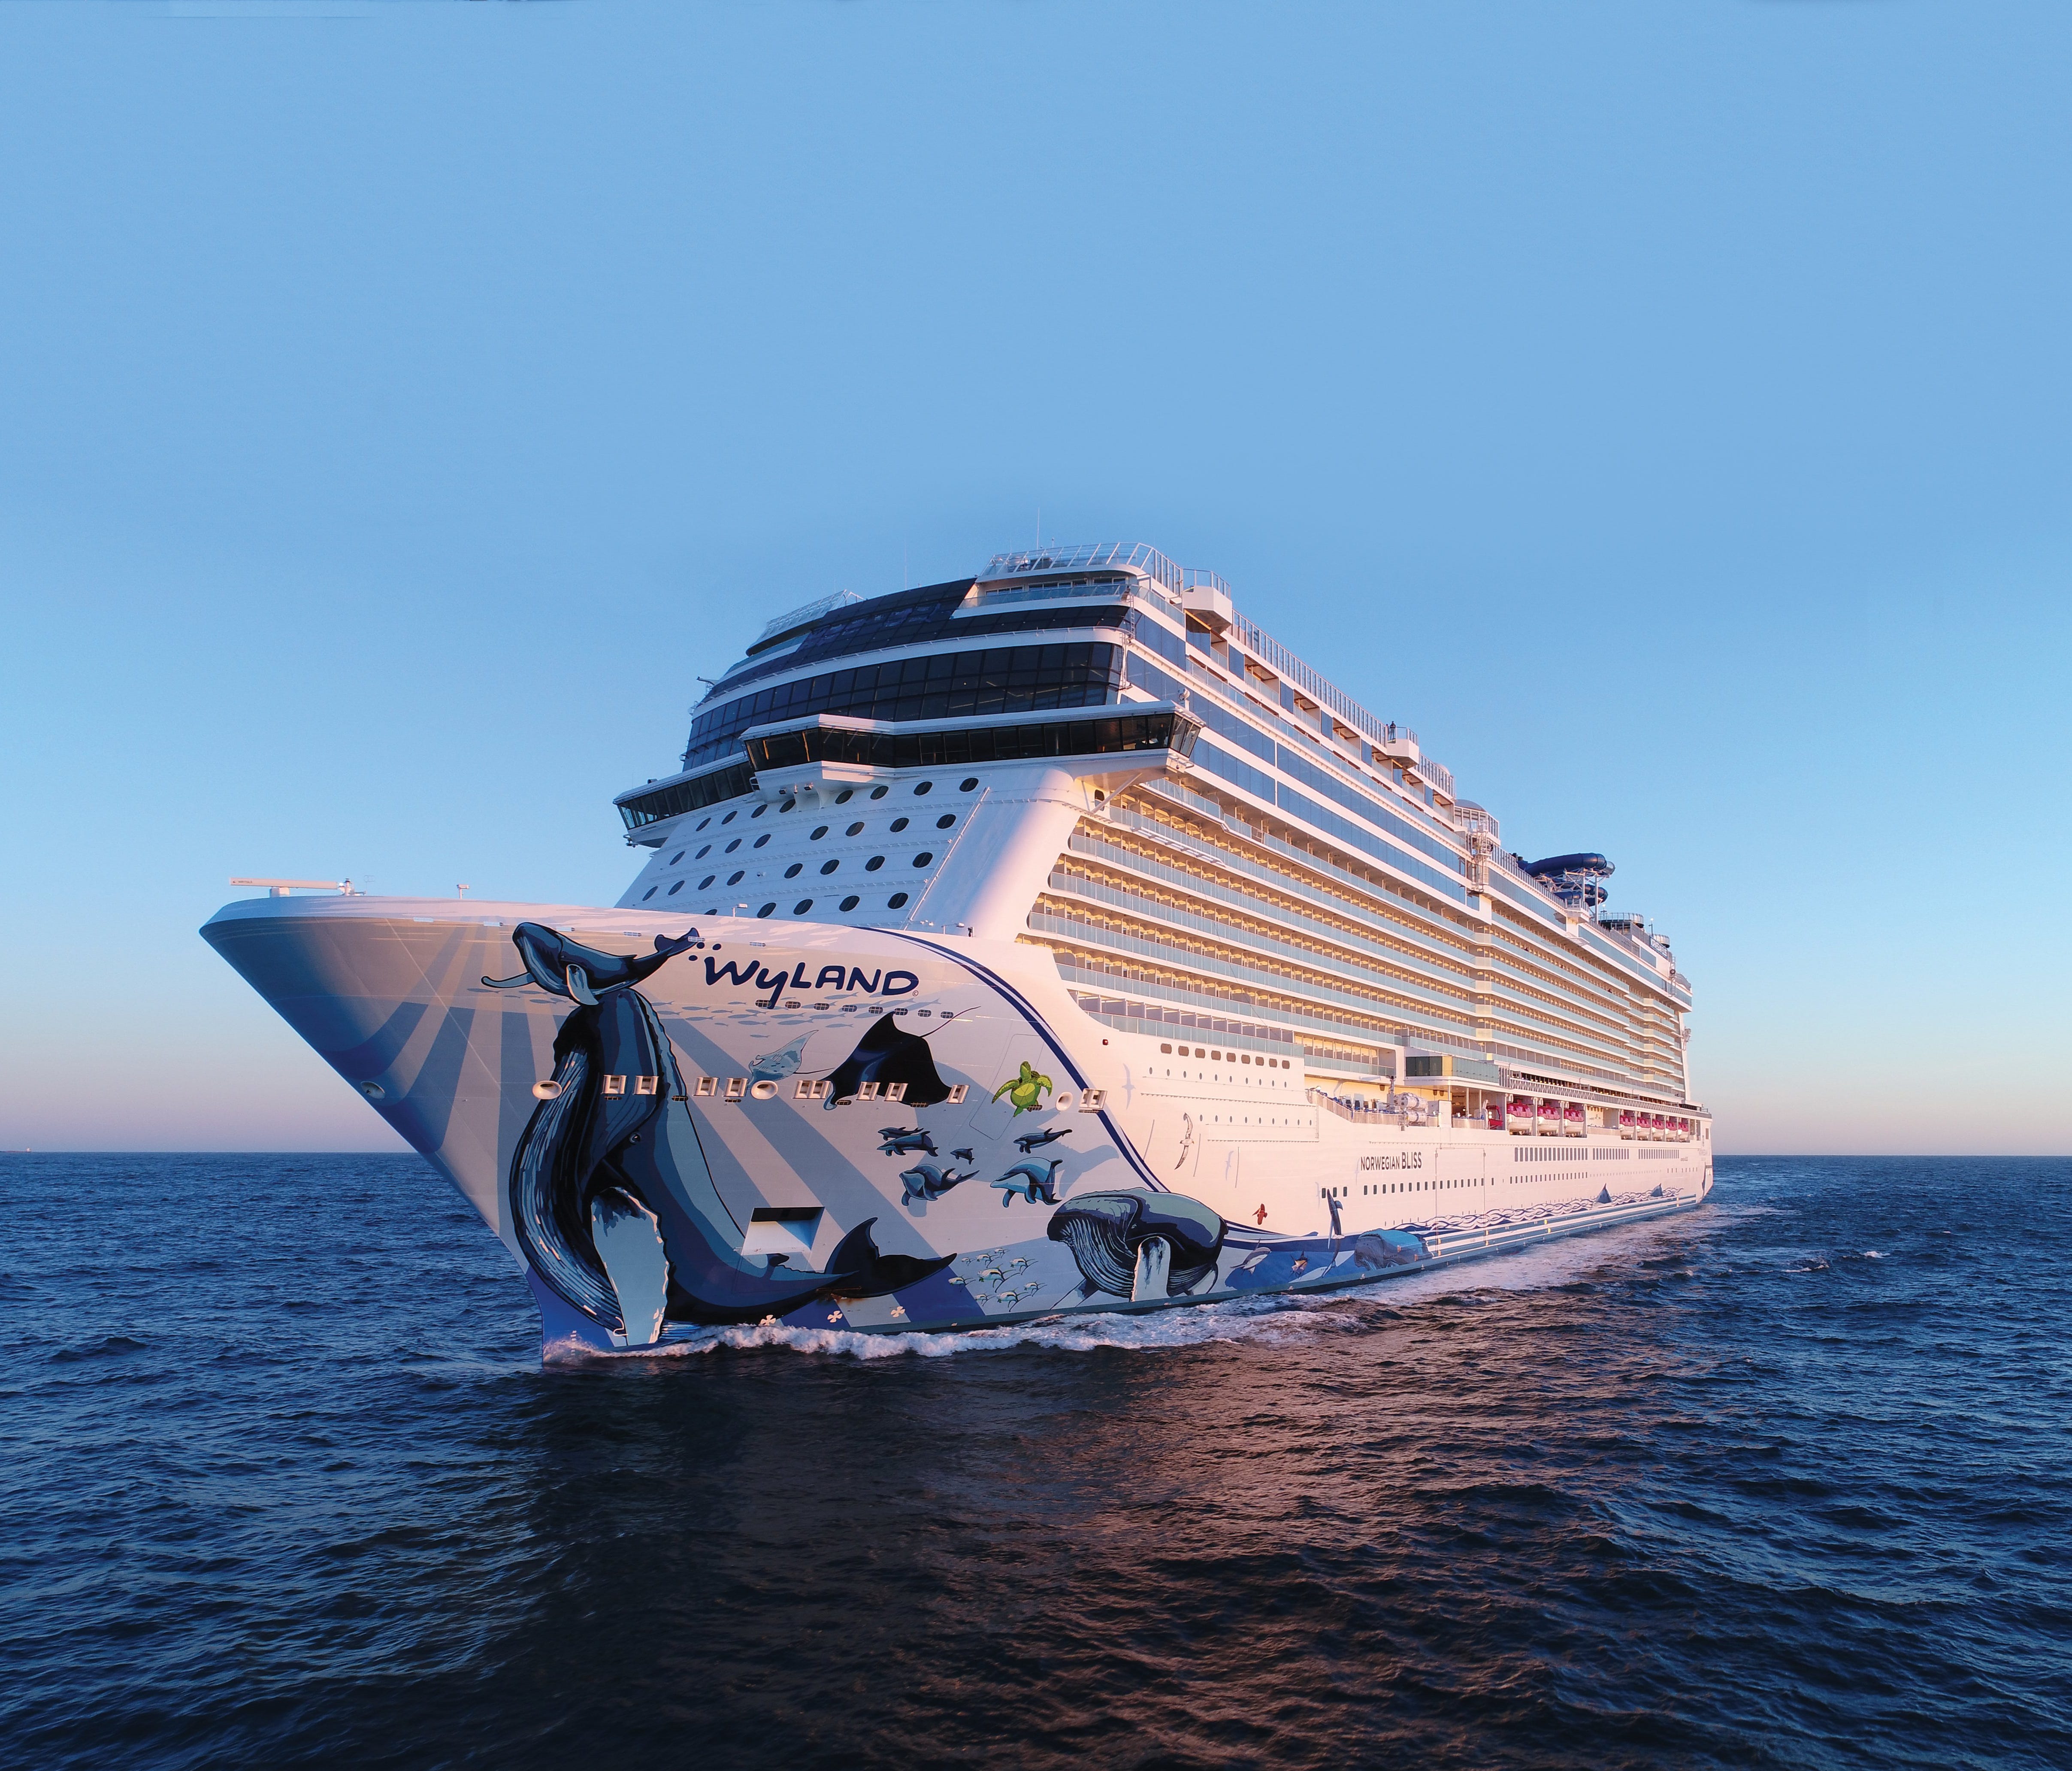 At 168,028 tons, Norwegian Bliss is the biggest ship ever for Miami-based Norwegian Cruise Line.